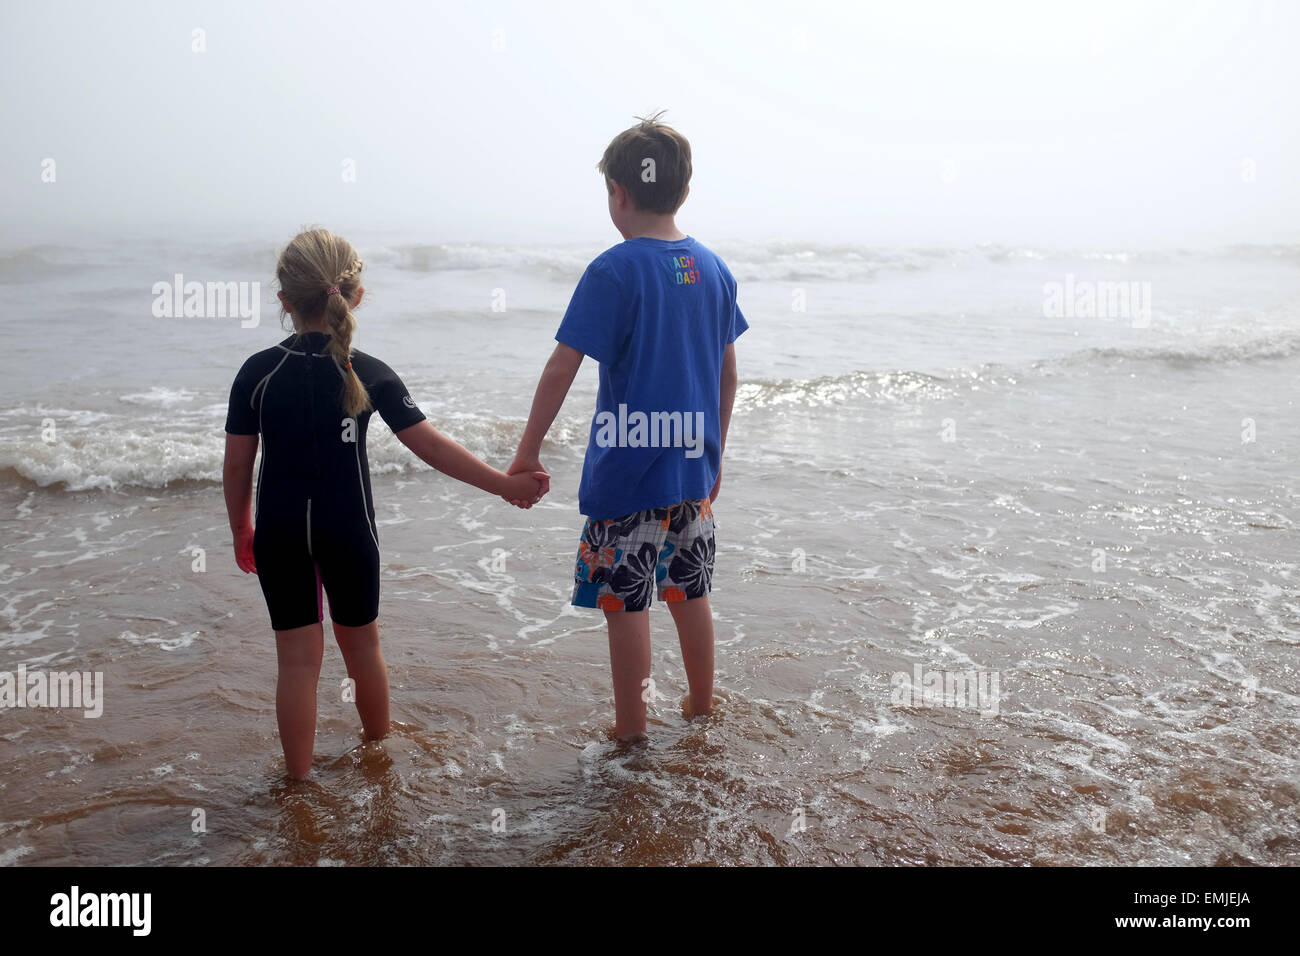 A young boy and girl holding hands look out to the sea on a misty day Stock Photo